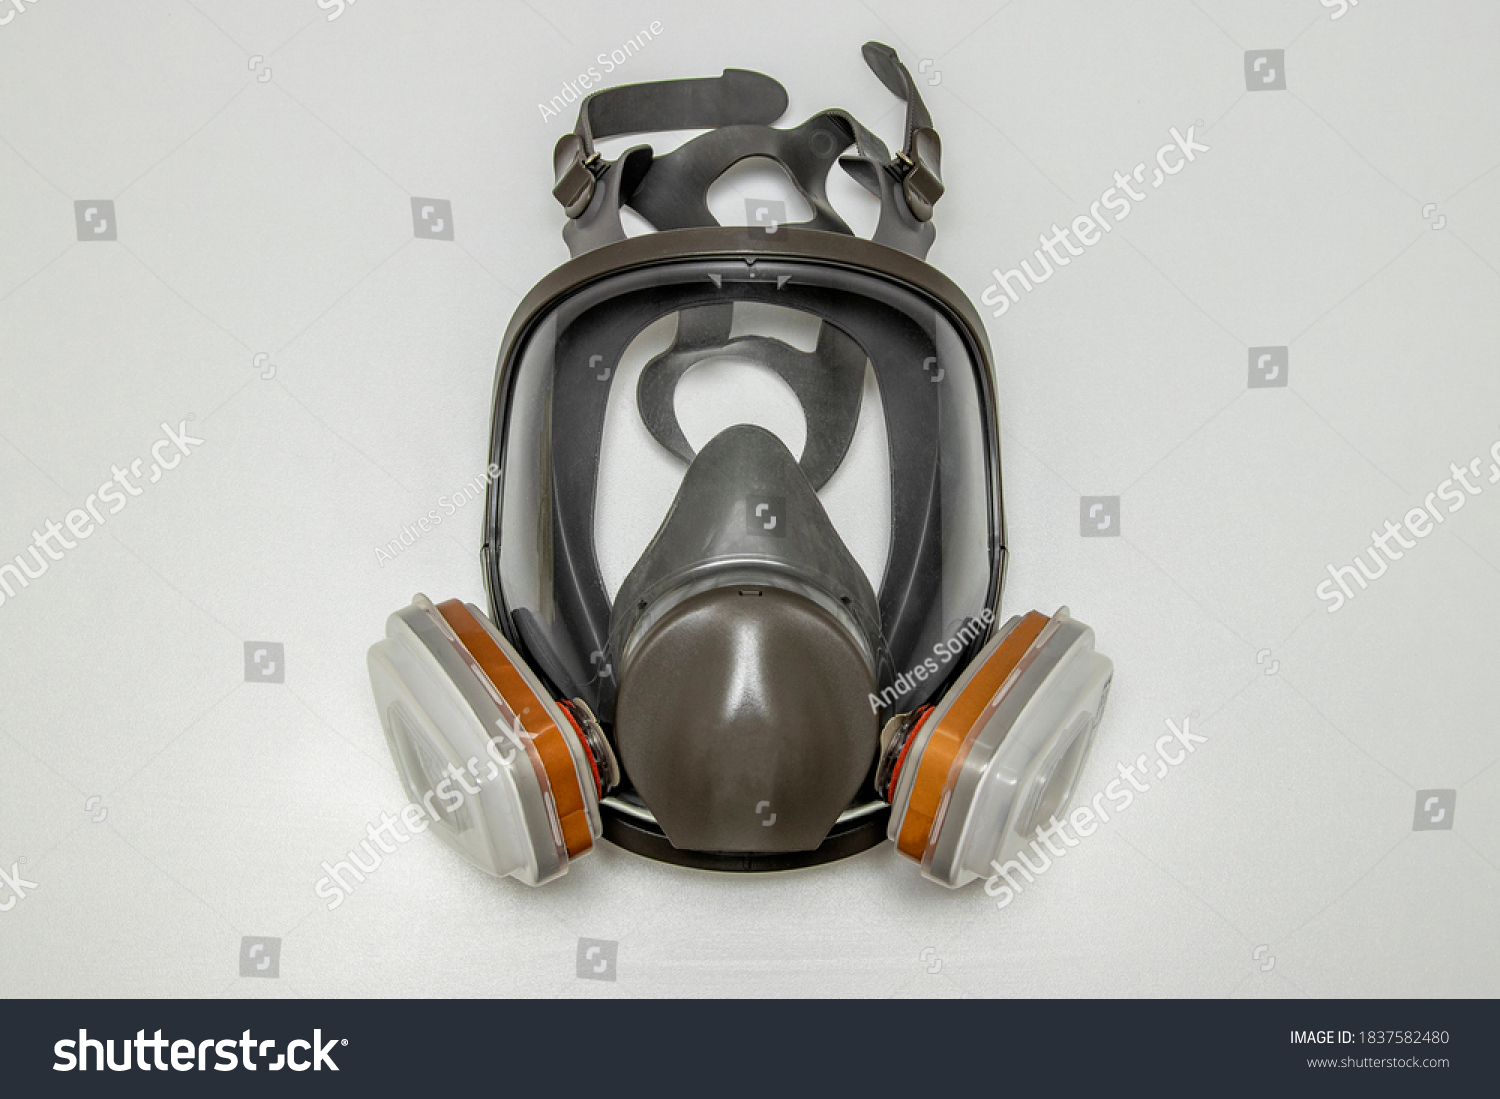 Full face mask respirator for personal respiratory protection. #1837582480